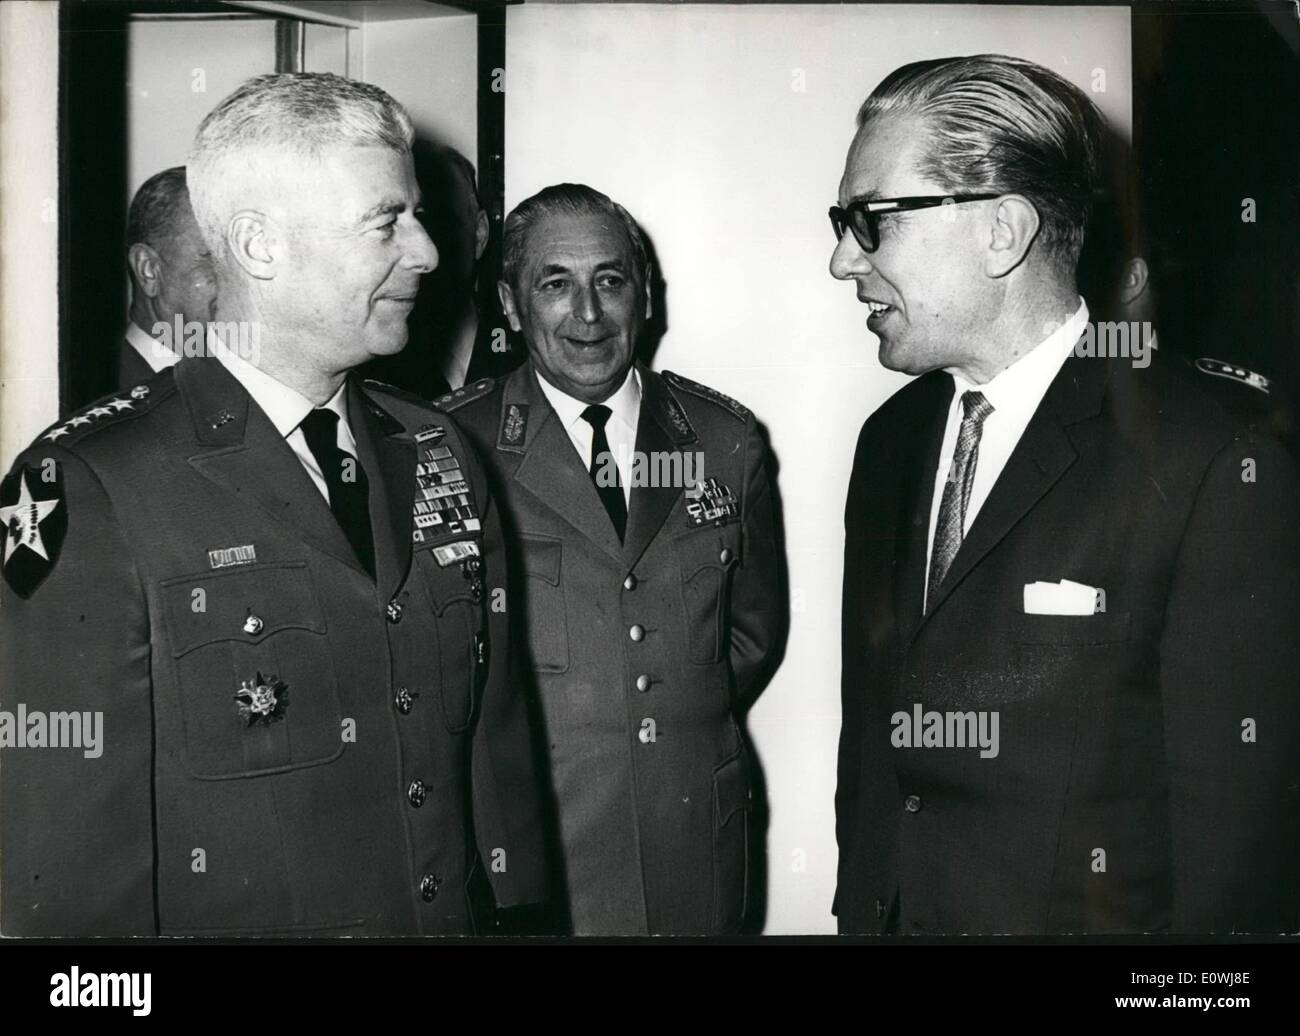 Mar. 03, 1963 - US-General Paul Freeman visited Bonn: Today 12.3.1963 arrived the chief commander of the US-Forces in Europa, General Paul L. Freeman in the defence ministry in Bonn, where he spoke with the German defence minister Von Hassel about political problems. After that the General Freeman visited Chancellor Dr. Adenauer in his Palais Schaumburg in Bonn. Photo shows the General Freeman (left) talking with the German defense minister Von Hassel (right) Stock Photo